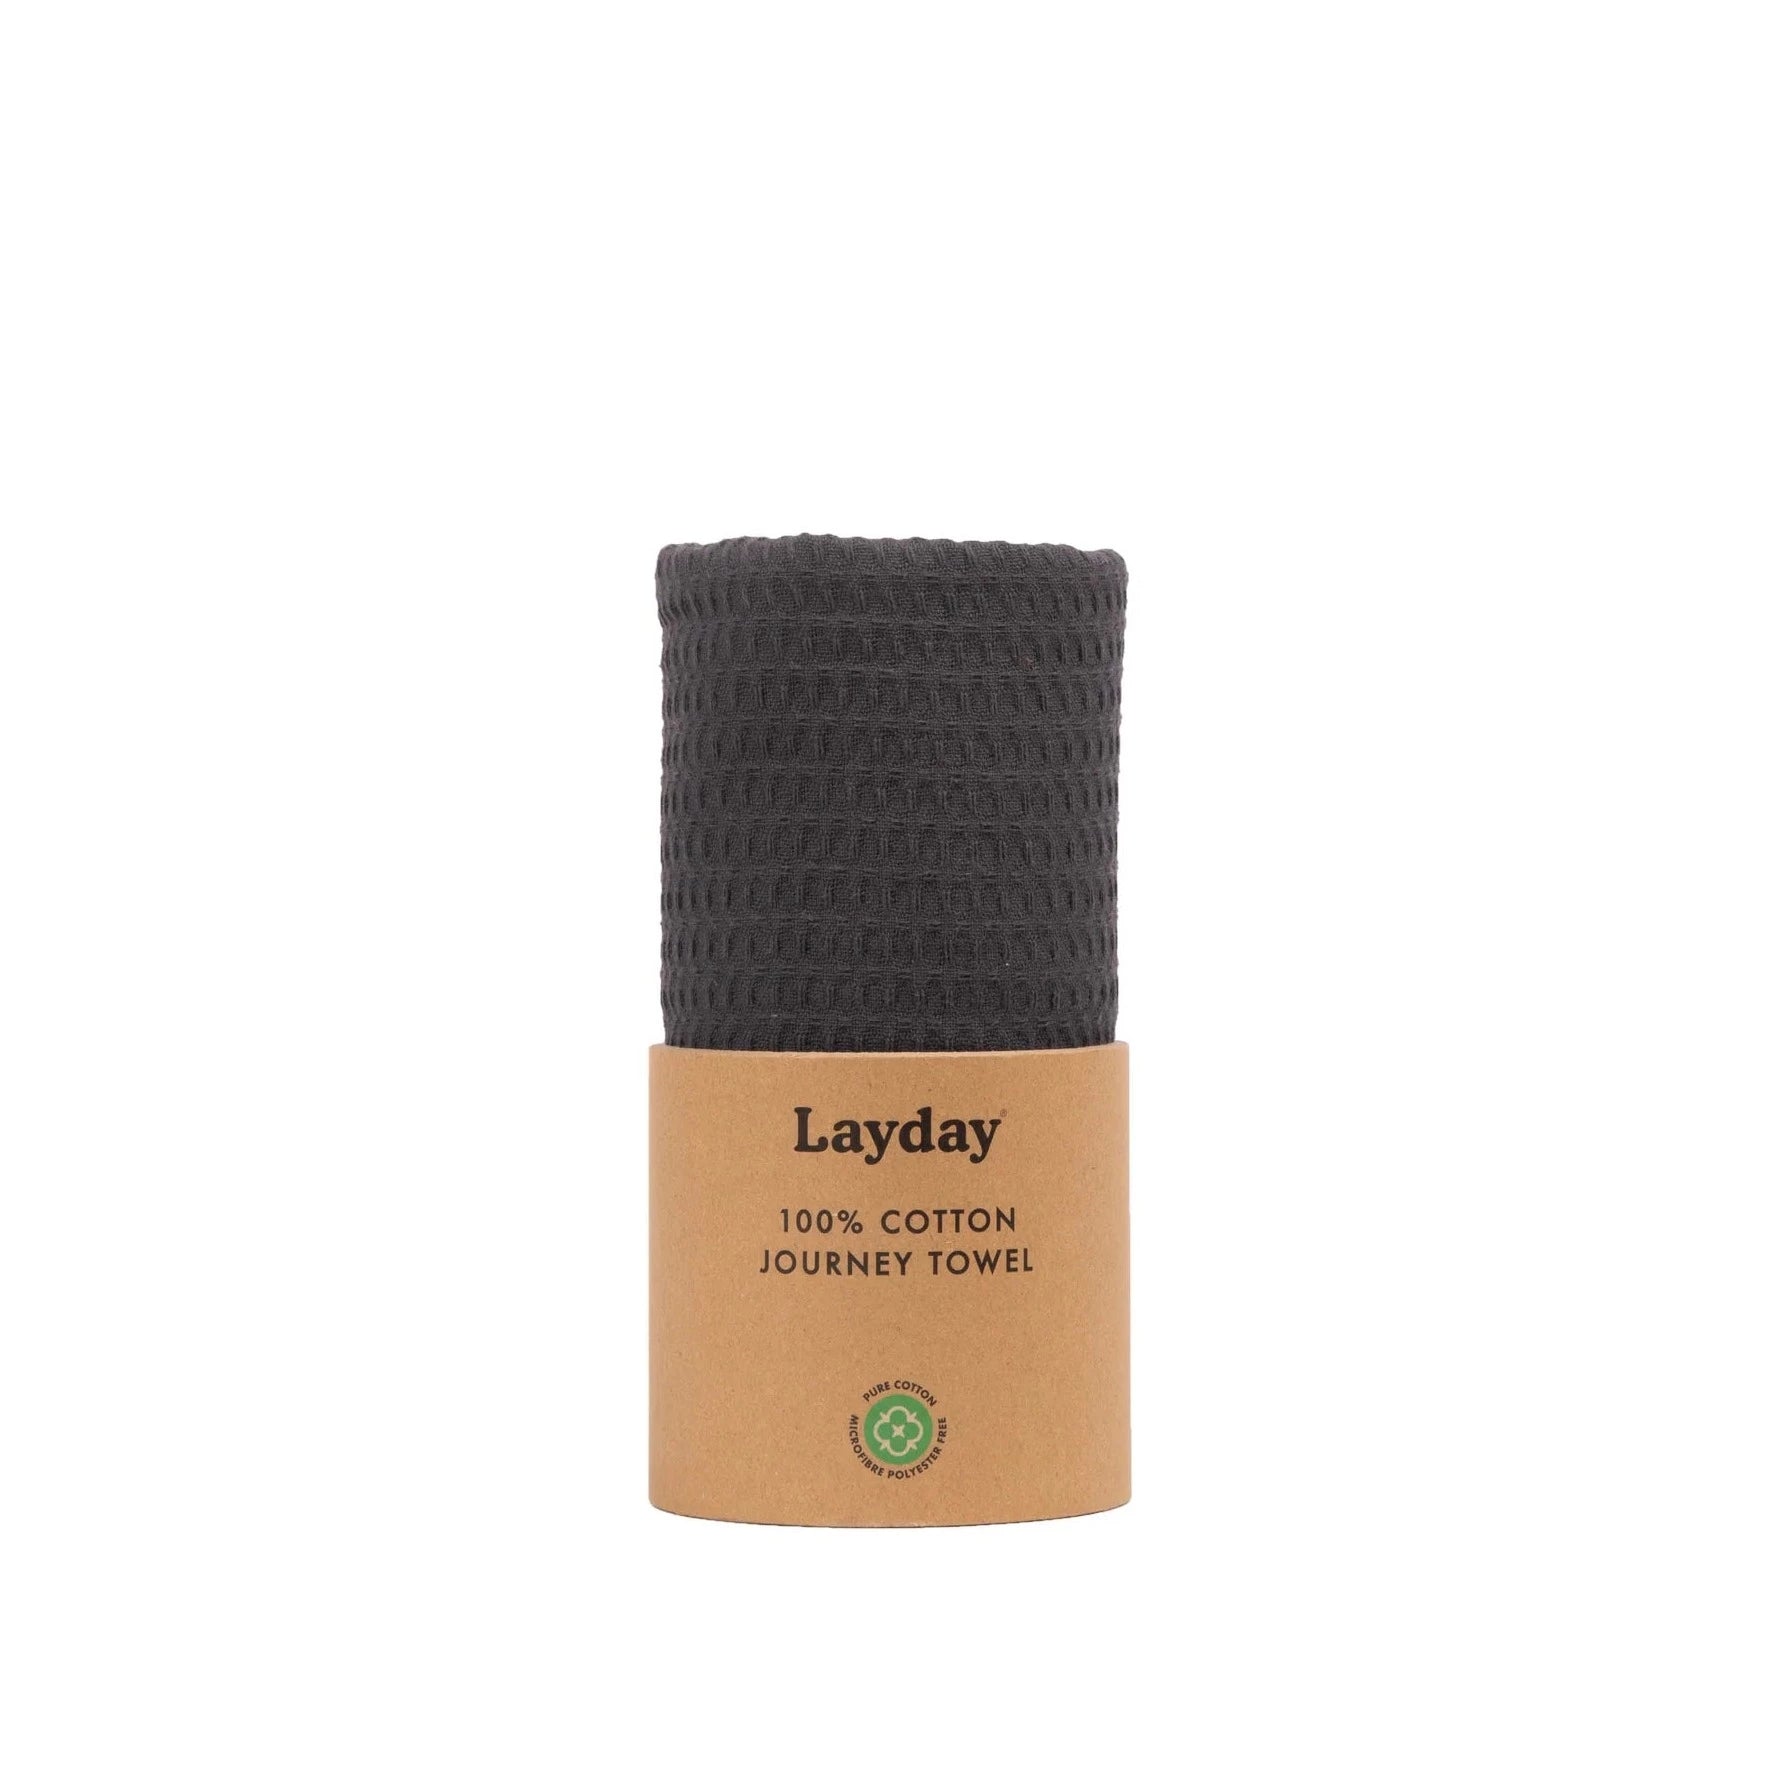 LAY DAY ROVER TOWEL: INK